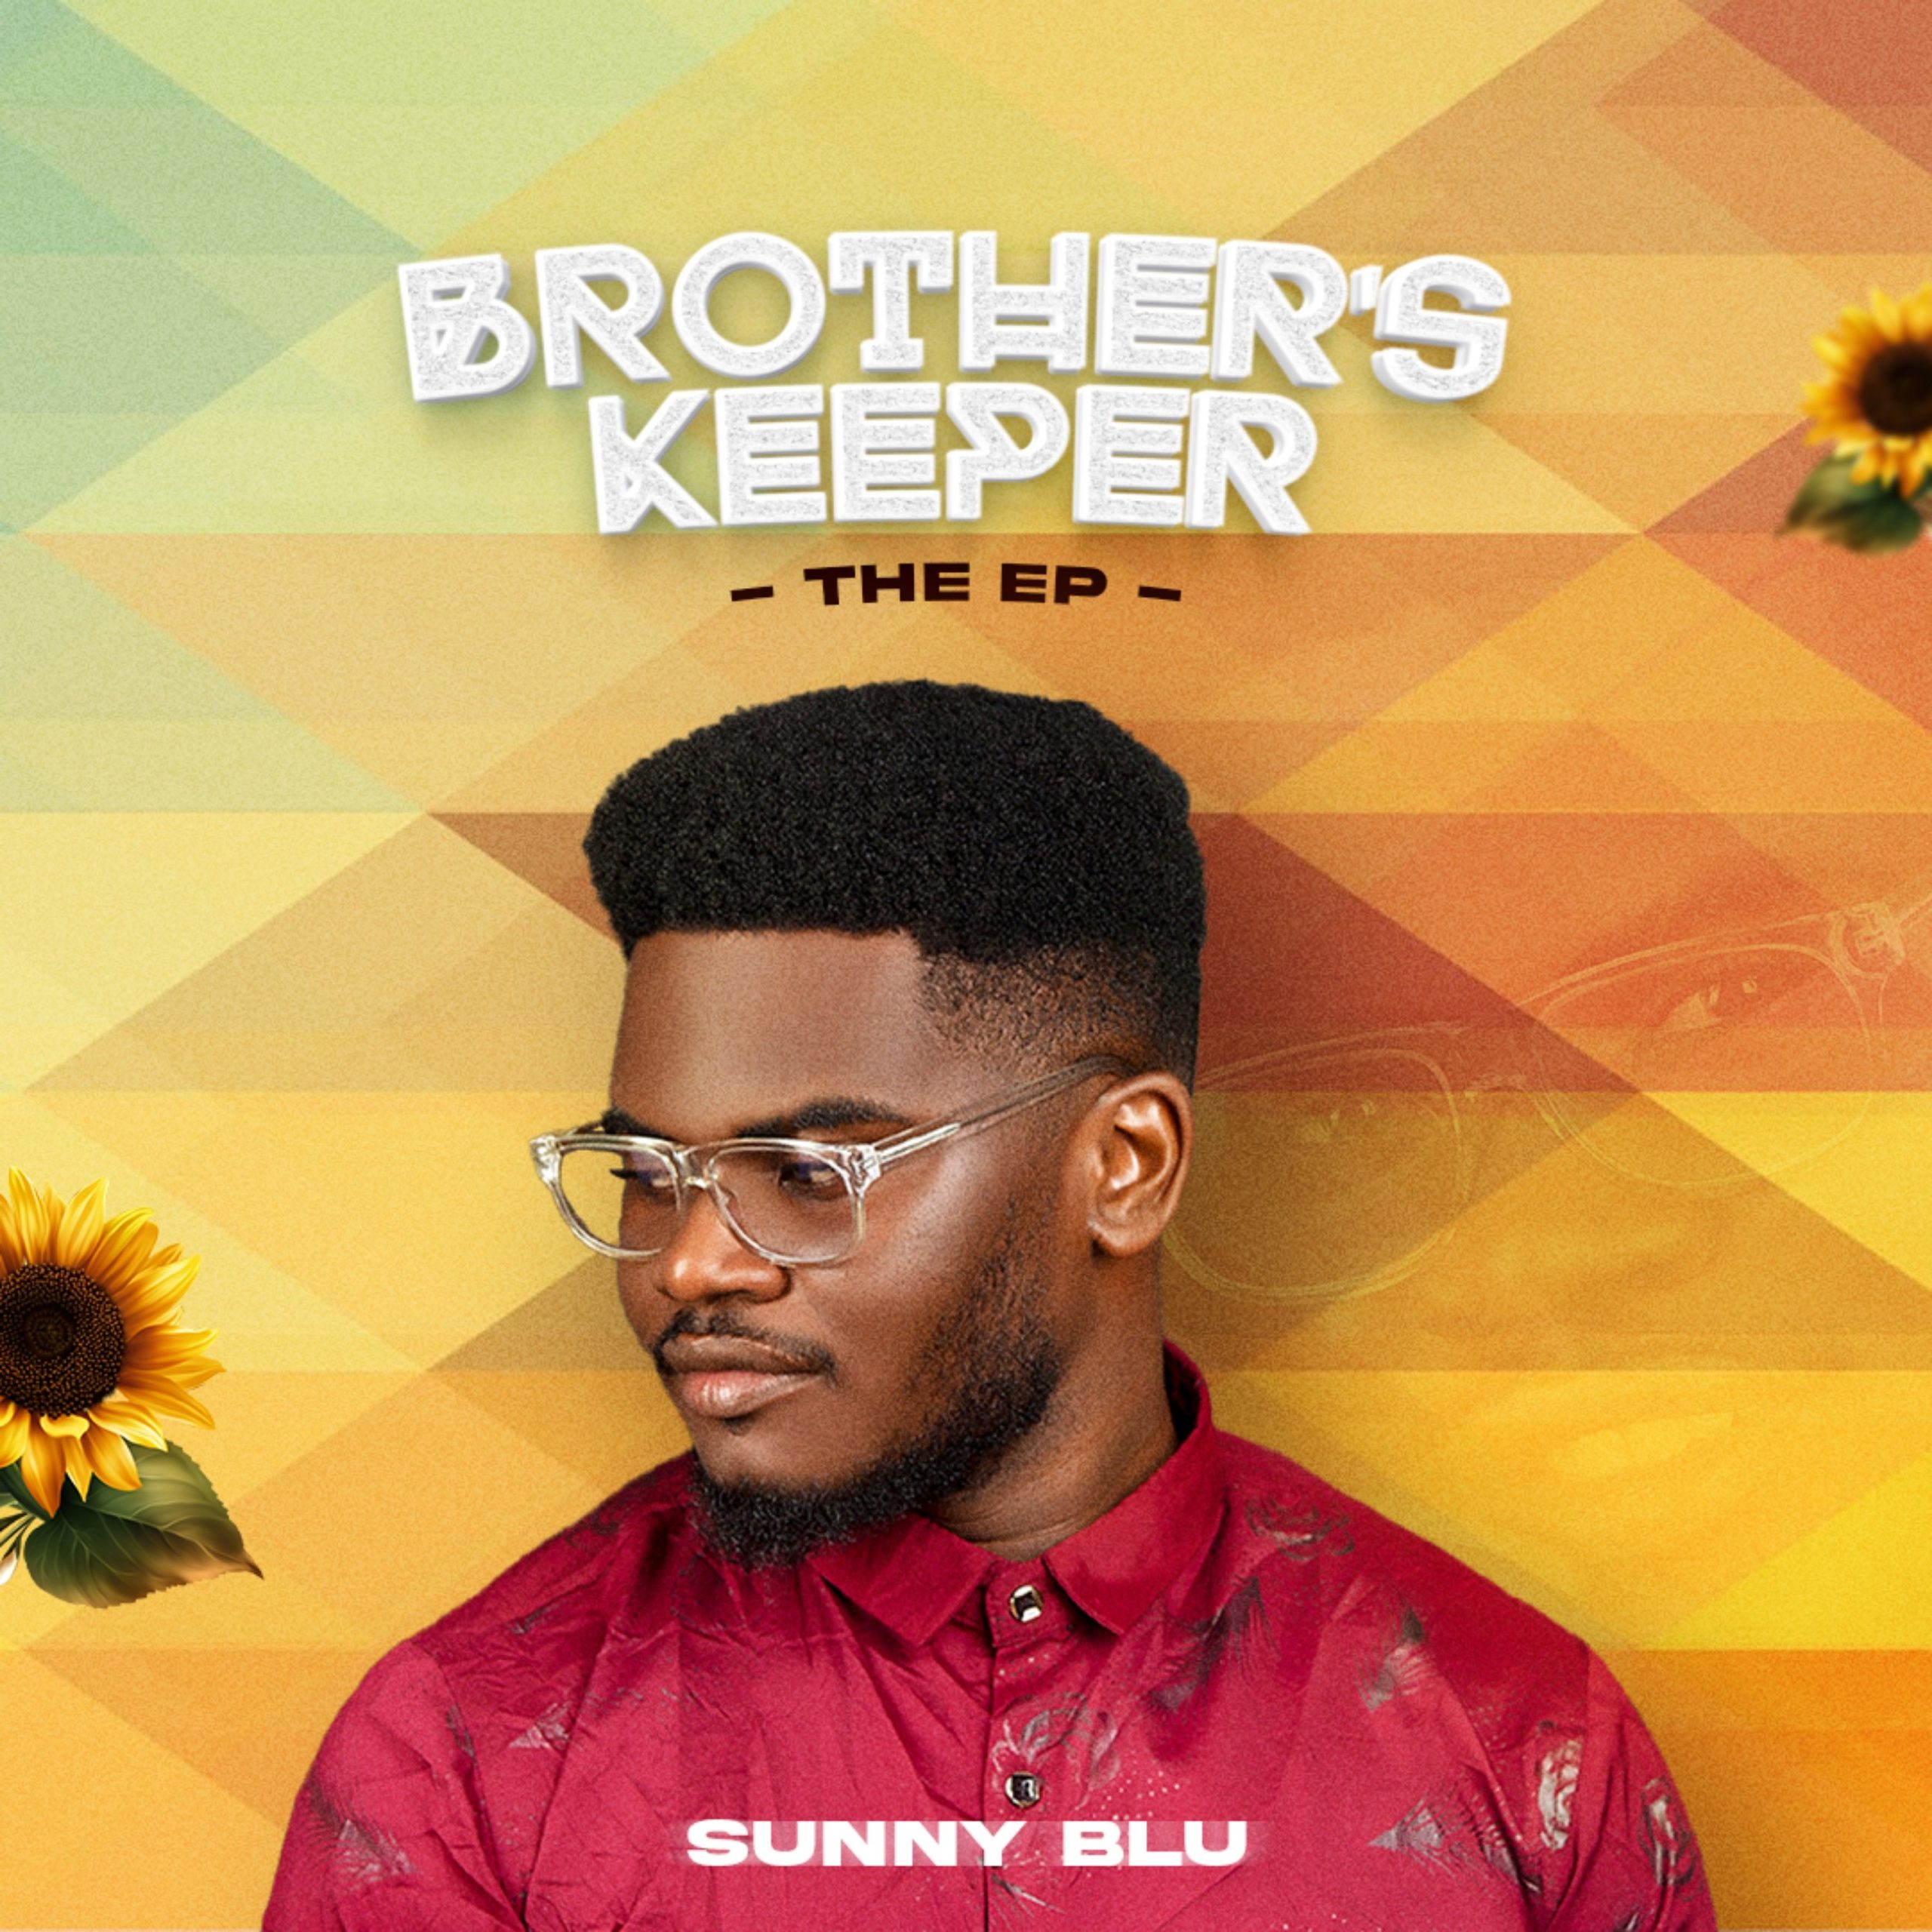 SunnyBLU Releases Brand New Ep "Brother's Keeper" (Vol 1)